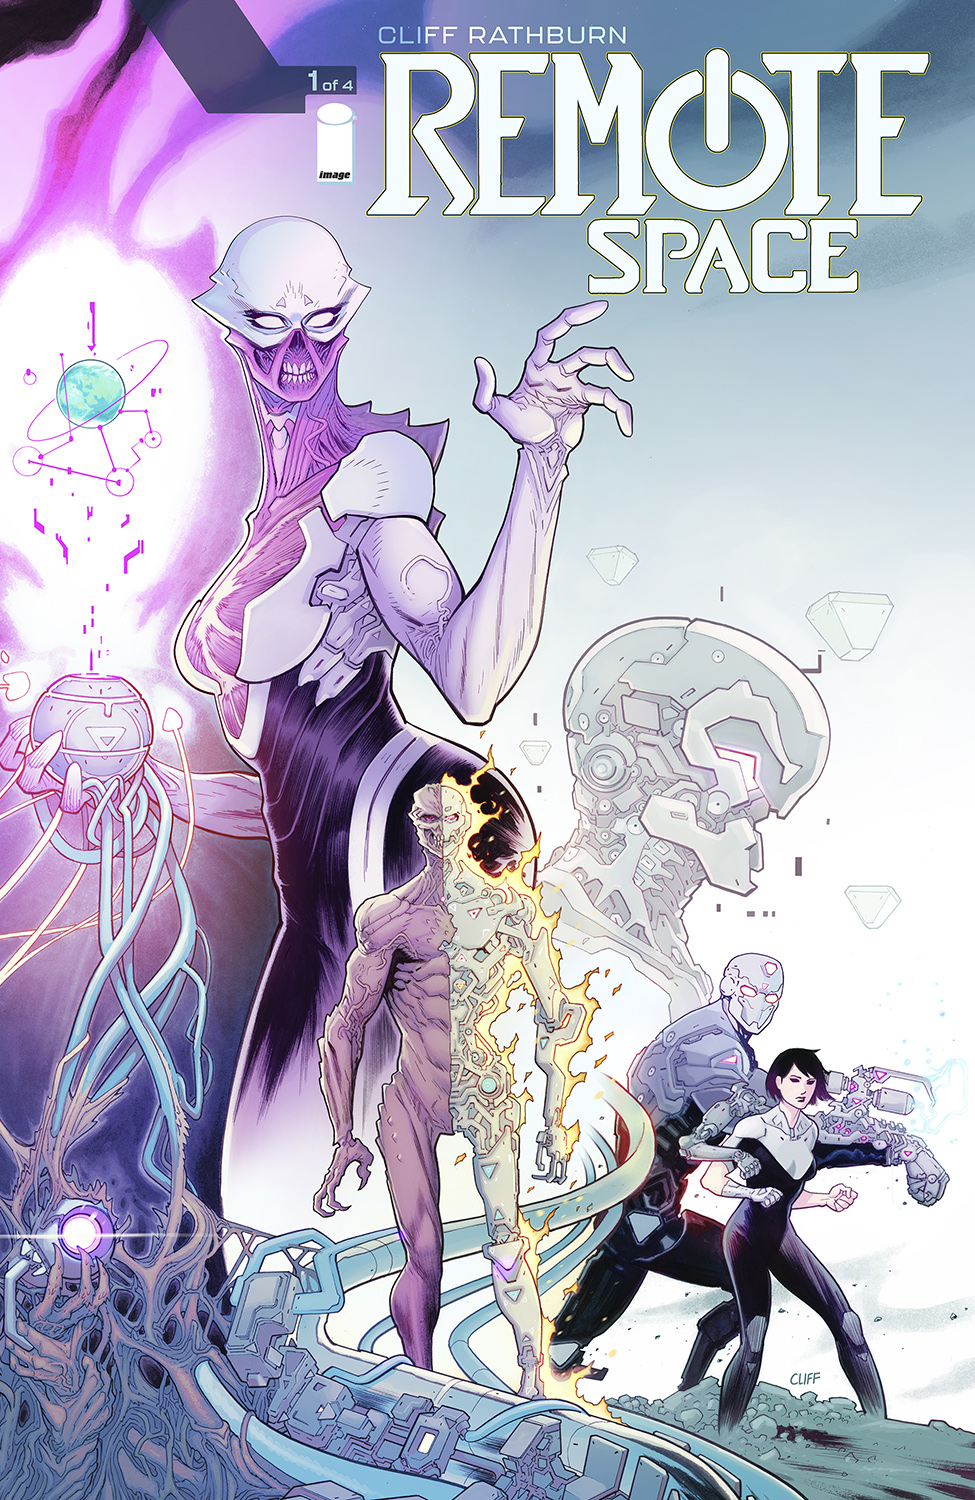 Remote Space #1 Cover A Cliff Rathburn Wraparound (Of 4)